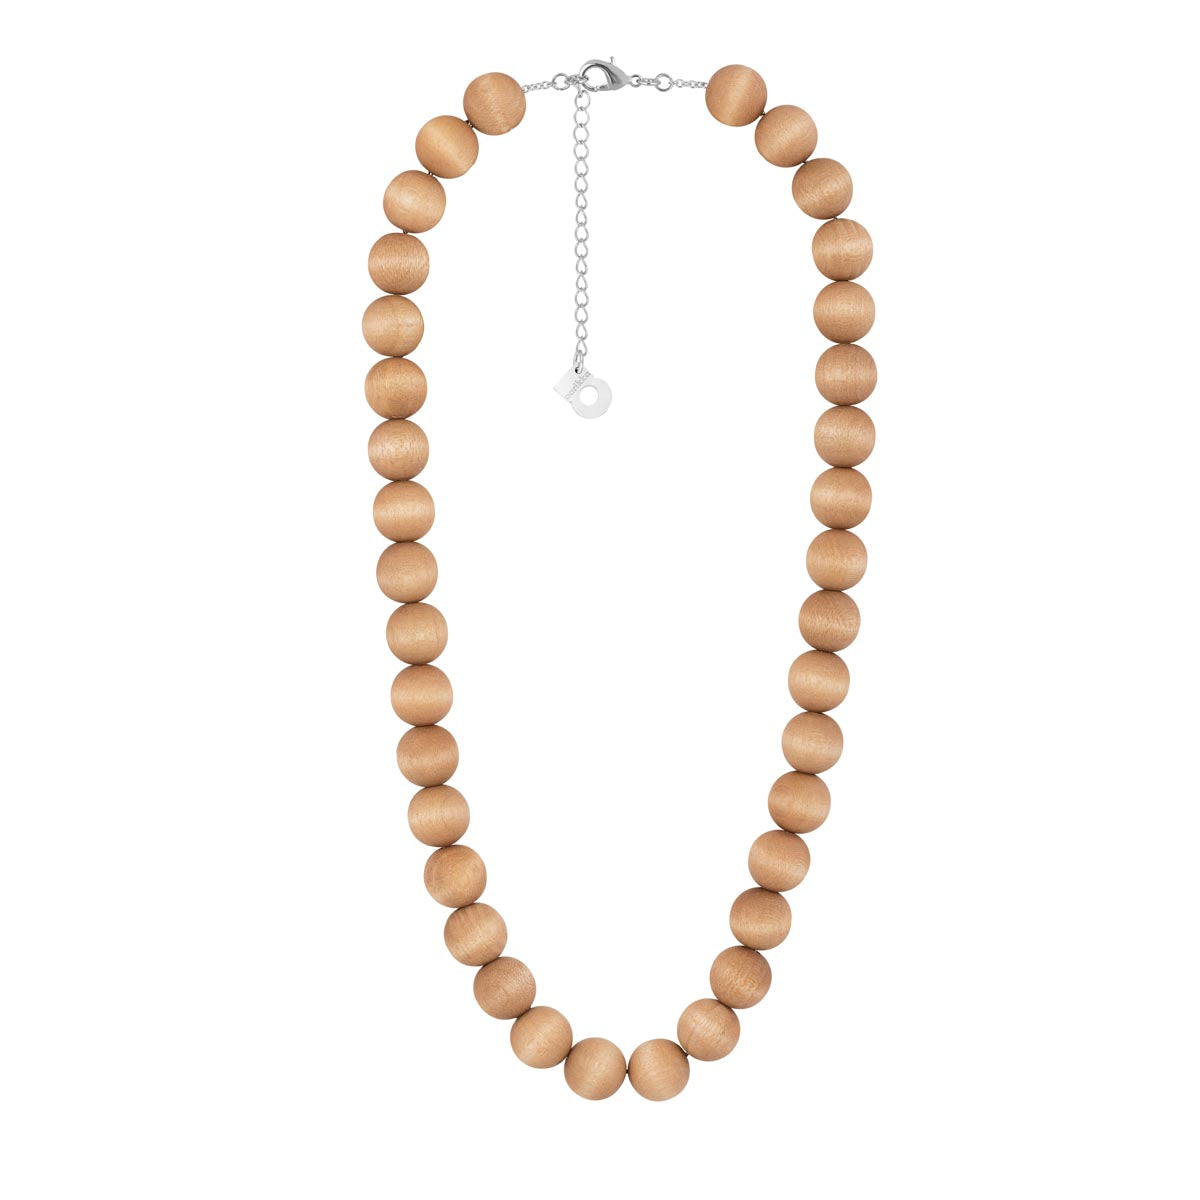 Aito necklace, light brown